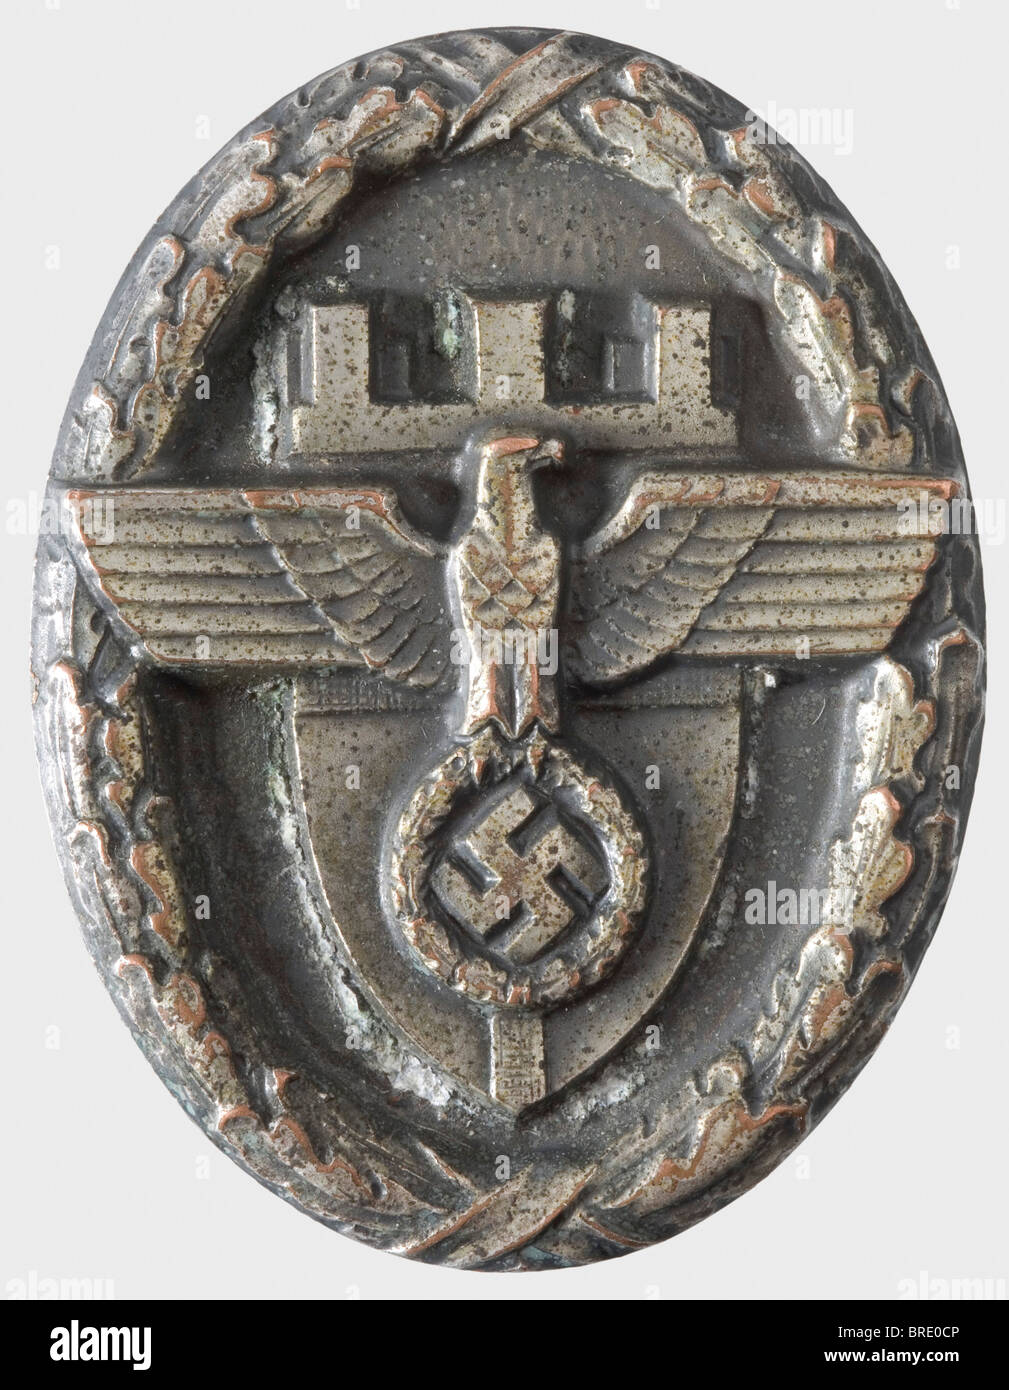 Gau Honour Badge East Prussia, with wearer number '903' Cupal, silvered with dark patina. Reverse stamped wearer's number and maker's mark 'Wächtler & Lange Mittweida i. SA.' with countersunk attachment needle system (OEK 3746), obvious signs of wear. Included is a Niemann photo expertise dated December 2007. historic, historical, 1930s, 1930s, 20th century, awards, award, German Reich, Third Reich, Nazi era, National Socialism, object, objects, stills, medal, decoration, medals, decorations, clipping, cut out, cut-out, cut-outs, honor, honour, National Sociali, Stock Photo